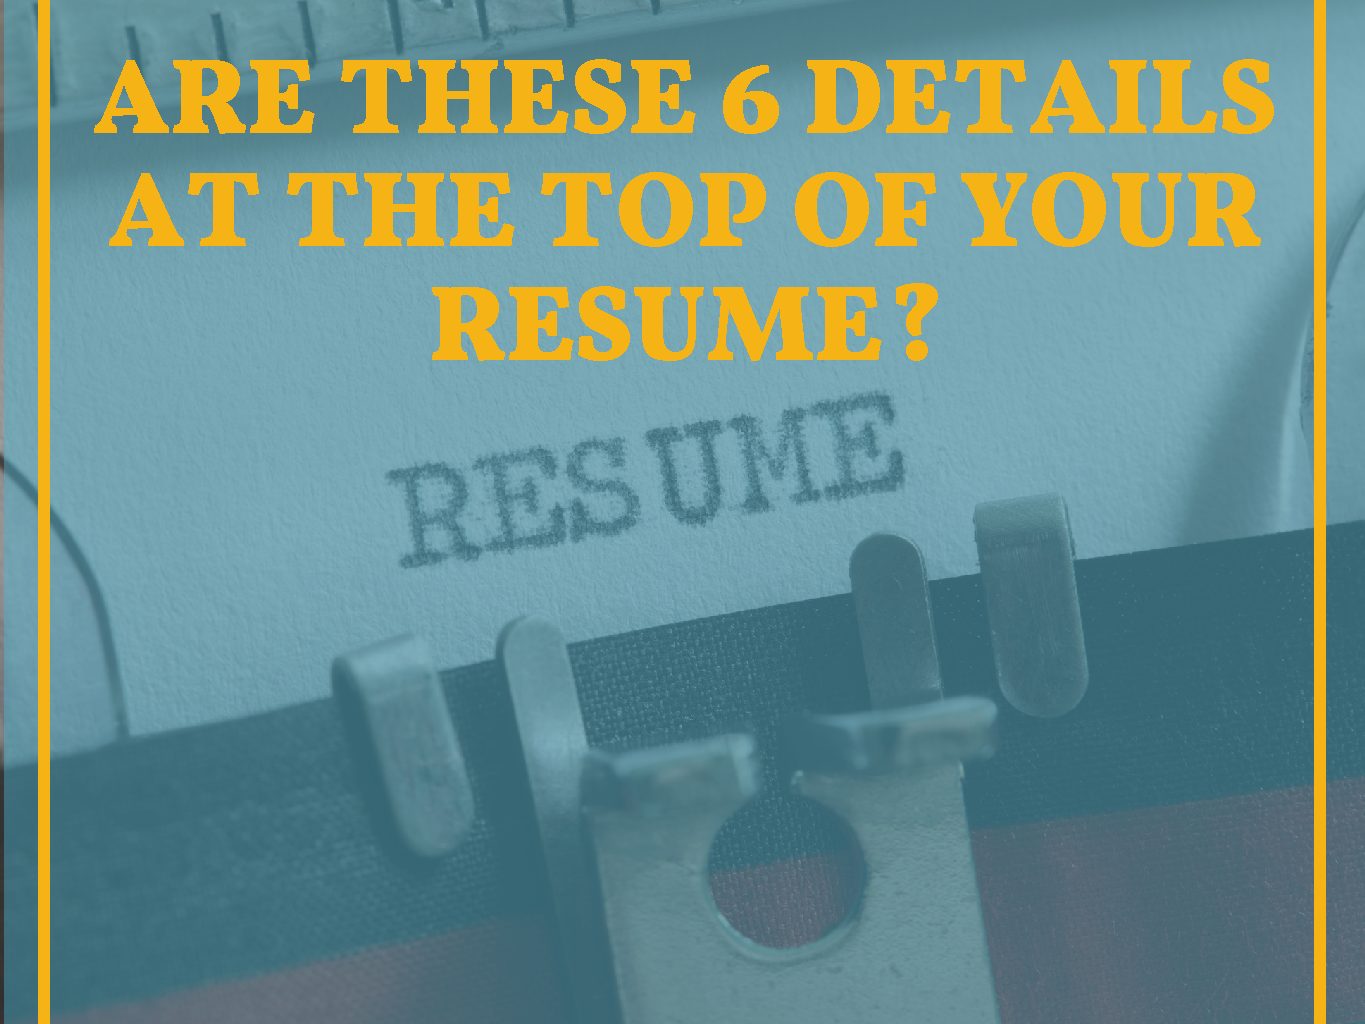 The 6 Details you Must Include at the Top of your Resume